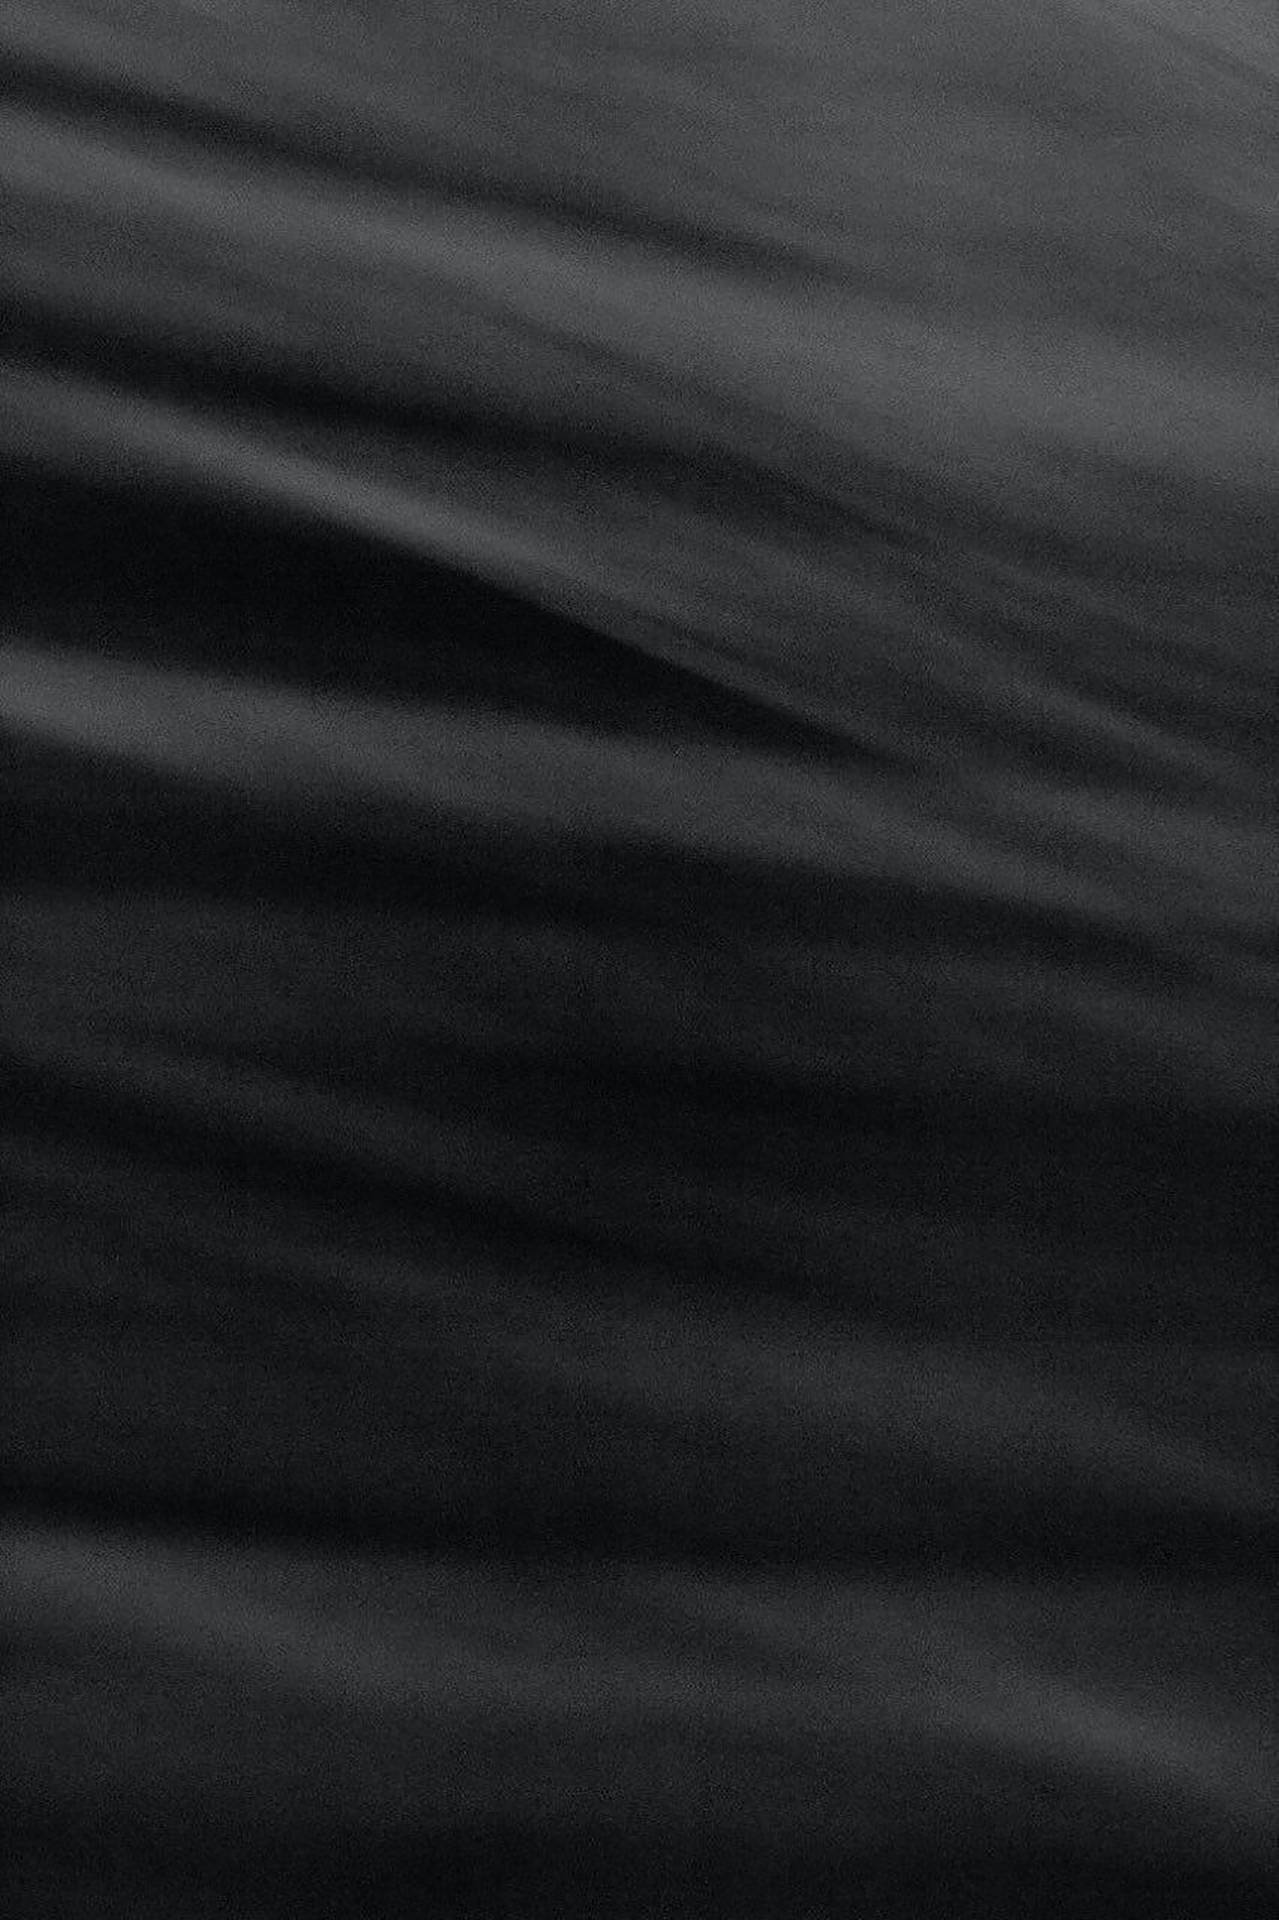 A Black And White Photo Of A Wave Wallpaper